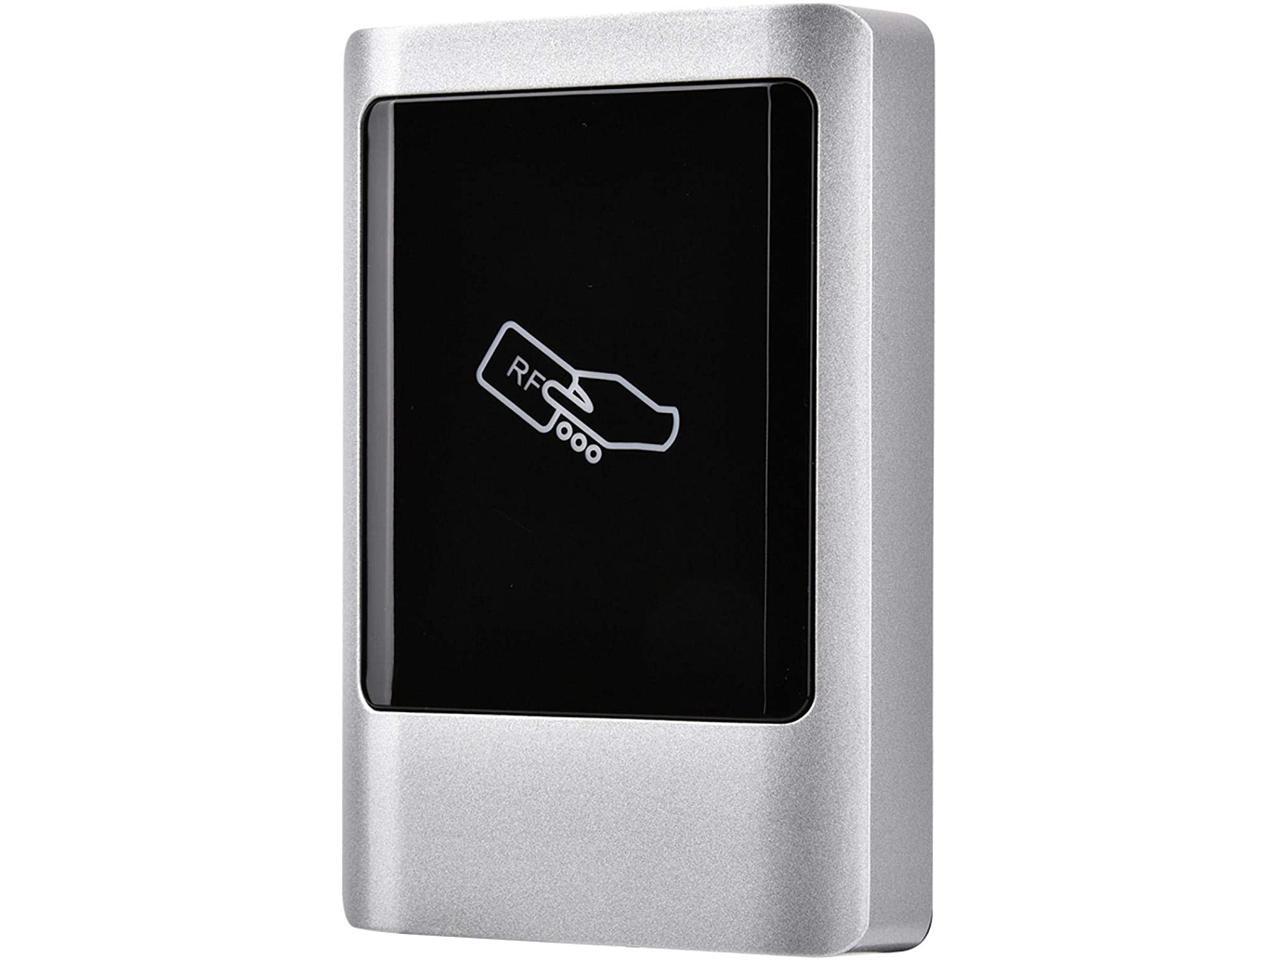 IC Waterproof Door Access Management Smart Card 13.56Mhz Card Reader 125Khz Card Reader for Government Agencies 